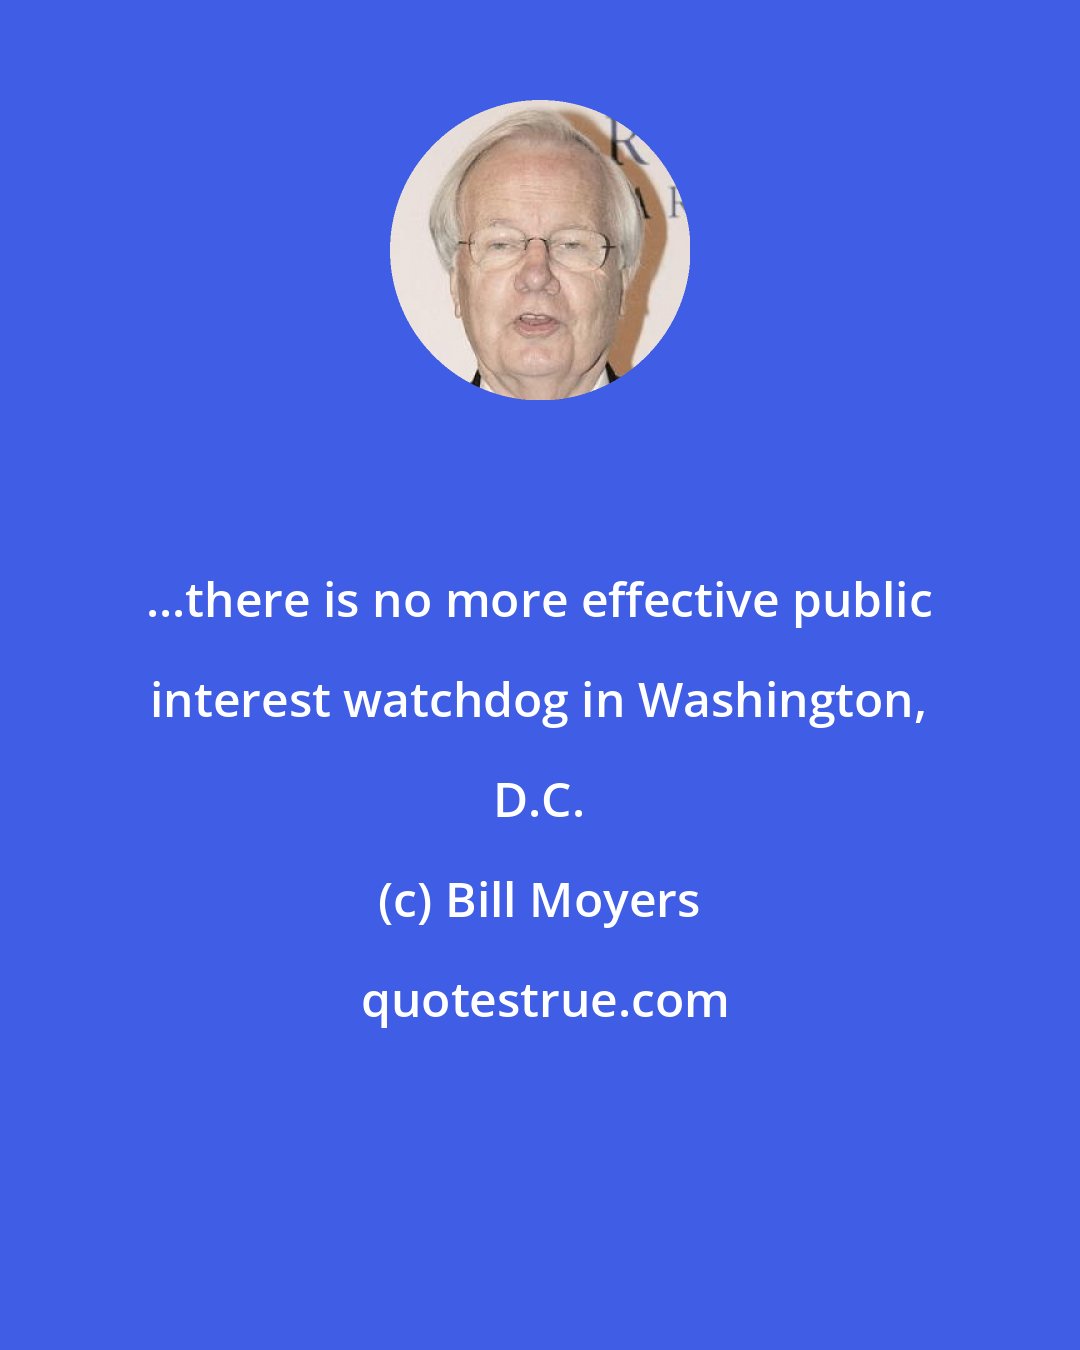 Bill Moyers: ...there is no more effective public interest watchdog in Washington, D.C.